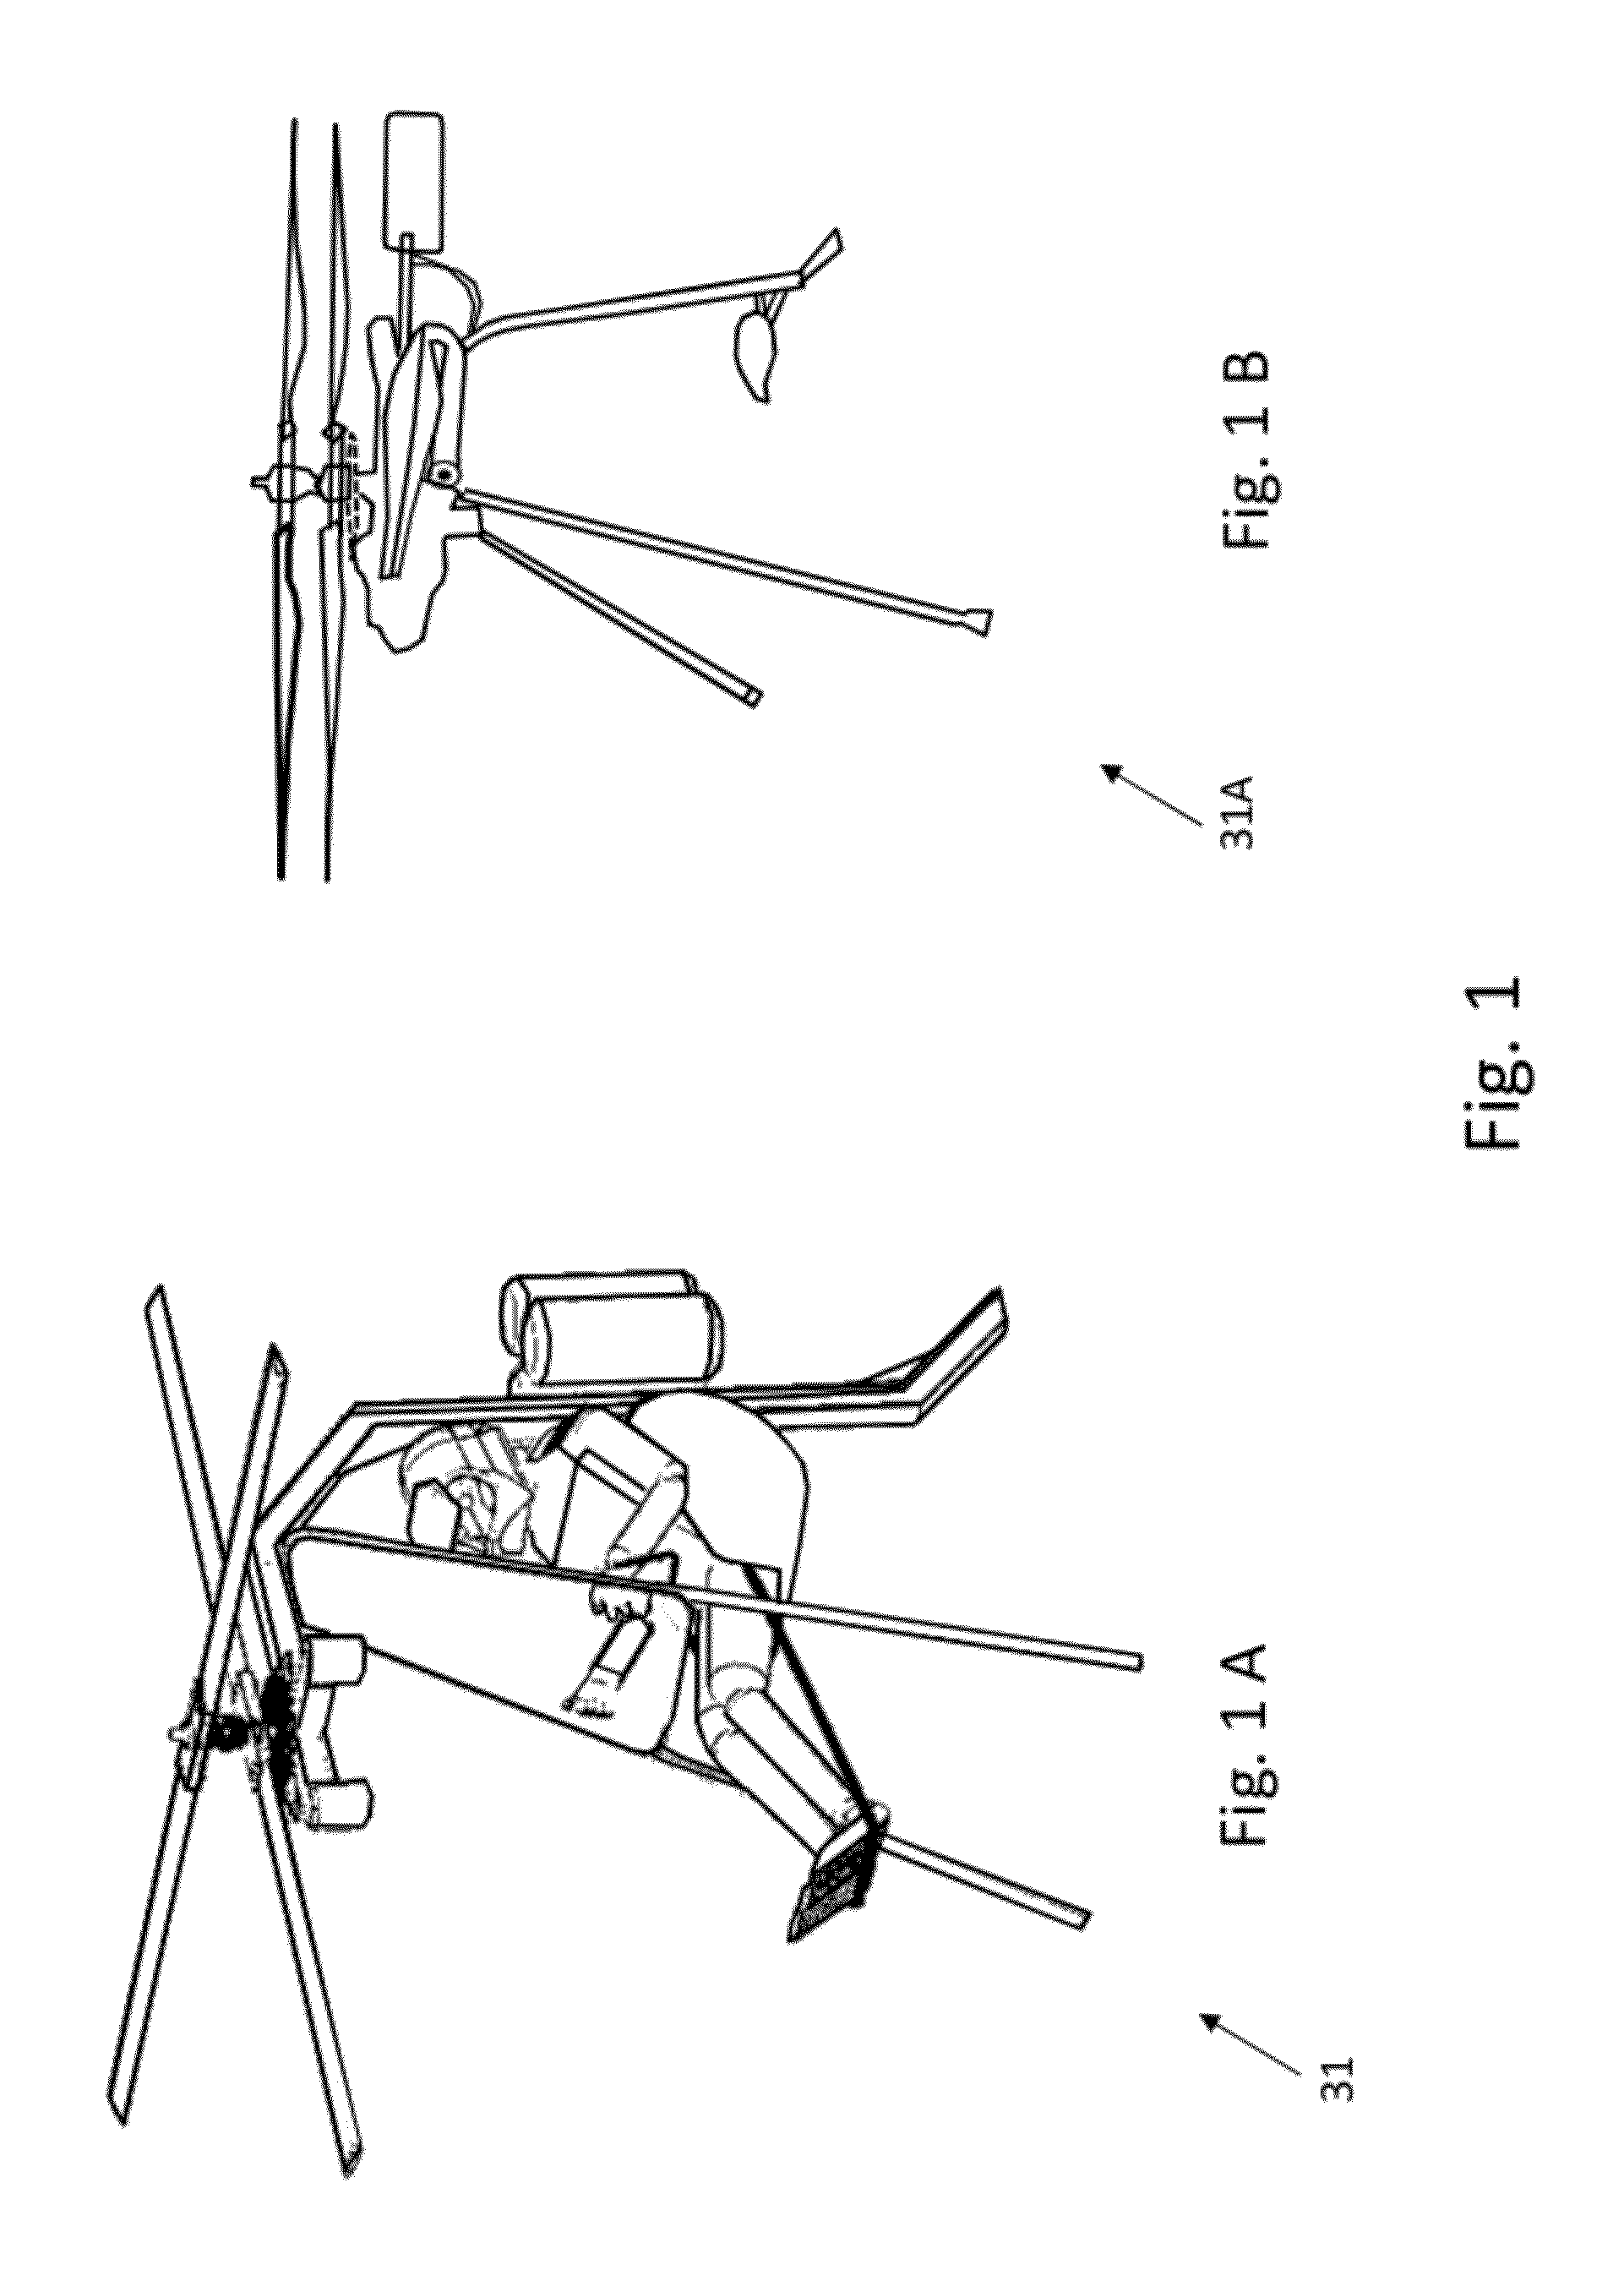 Special personal electric helicopter device with integral wind turbine recharging capability